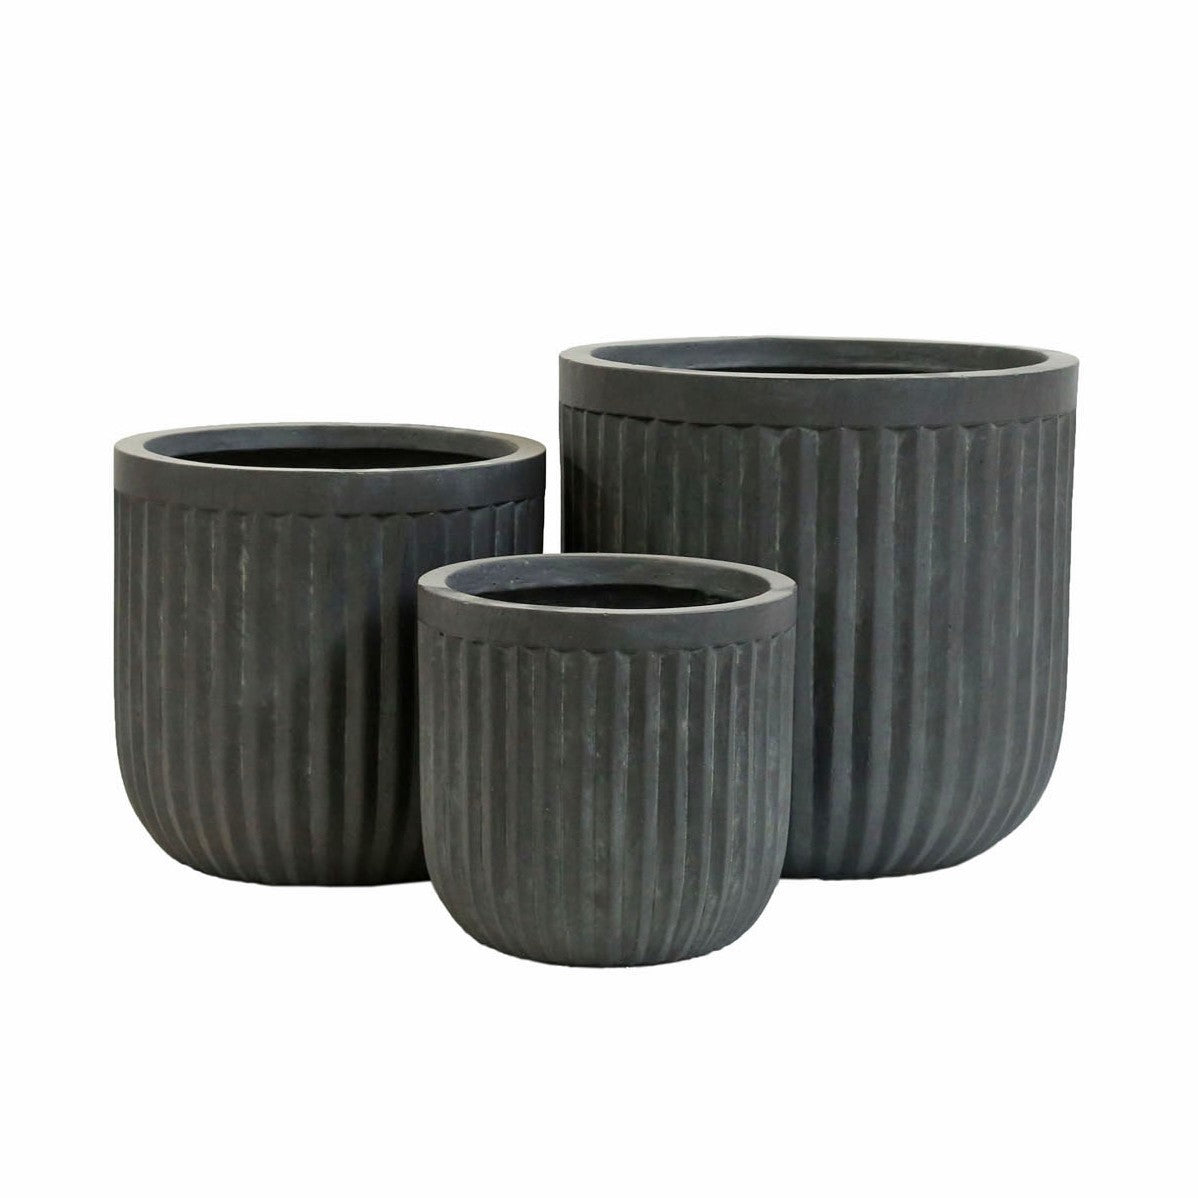 View Hortus Corrugated Planters Set of 3 information